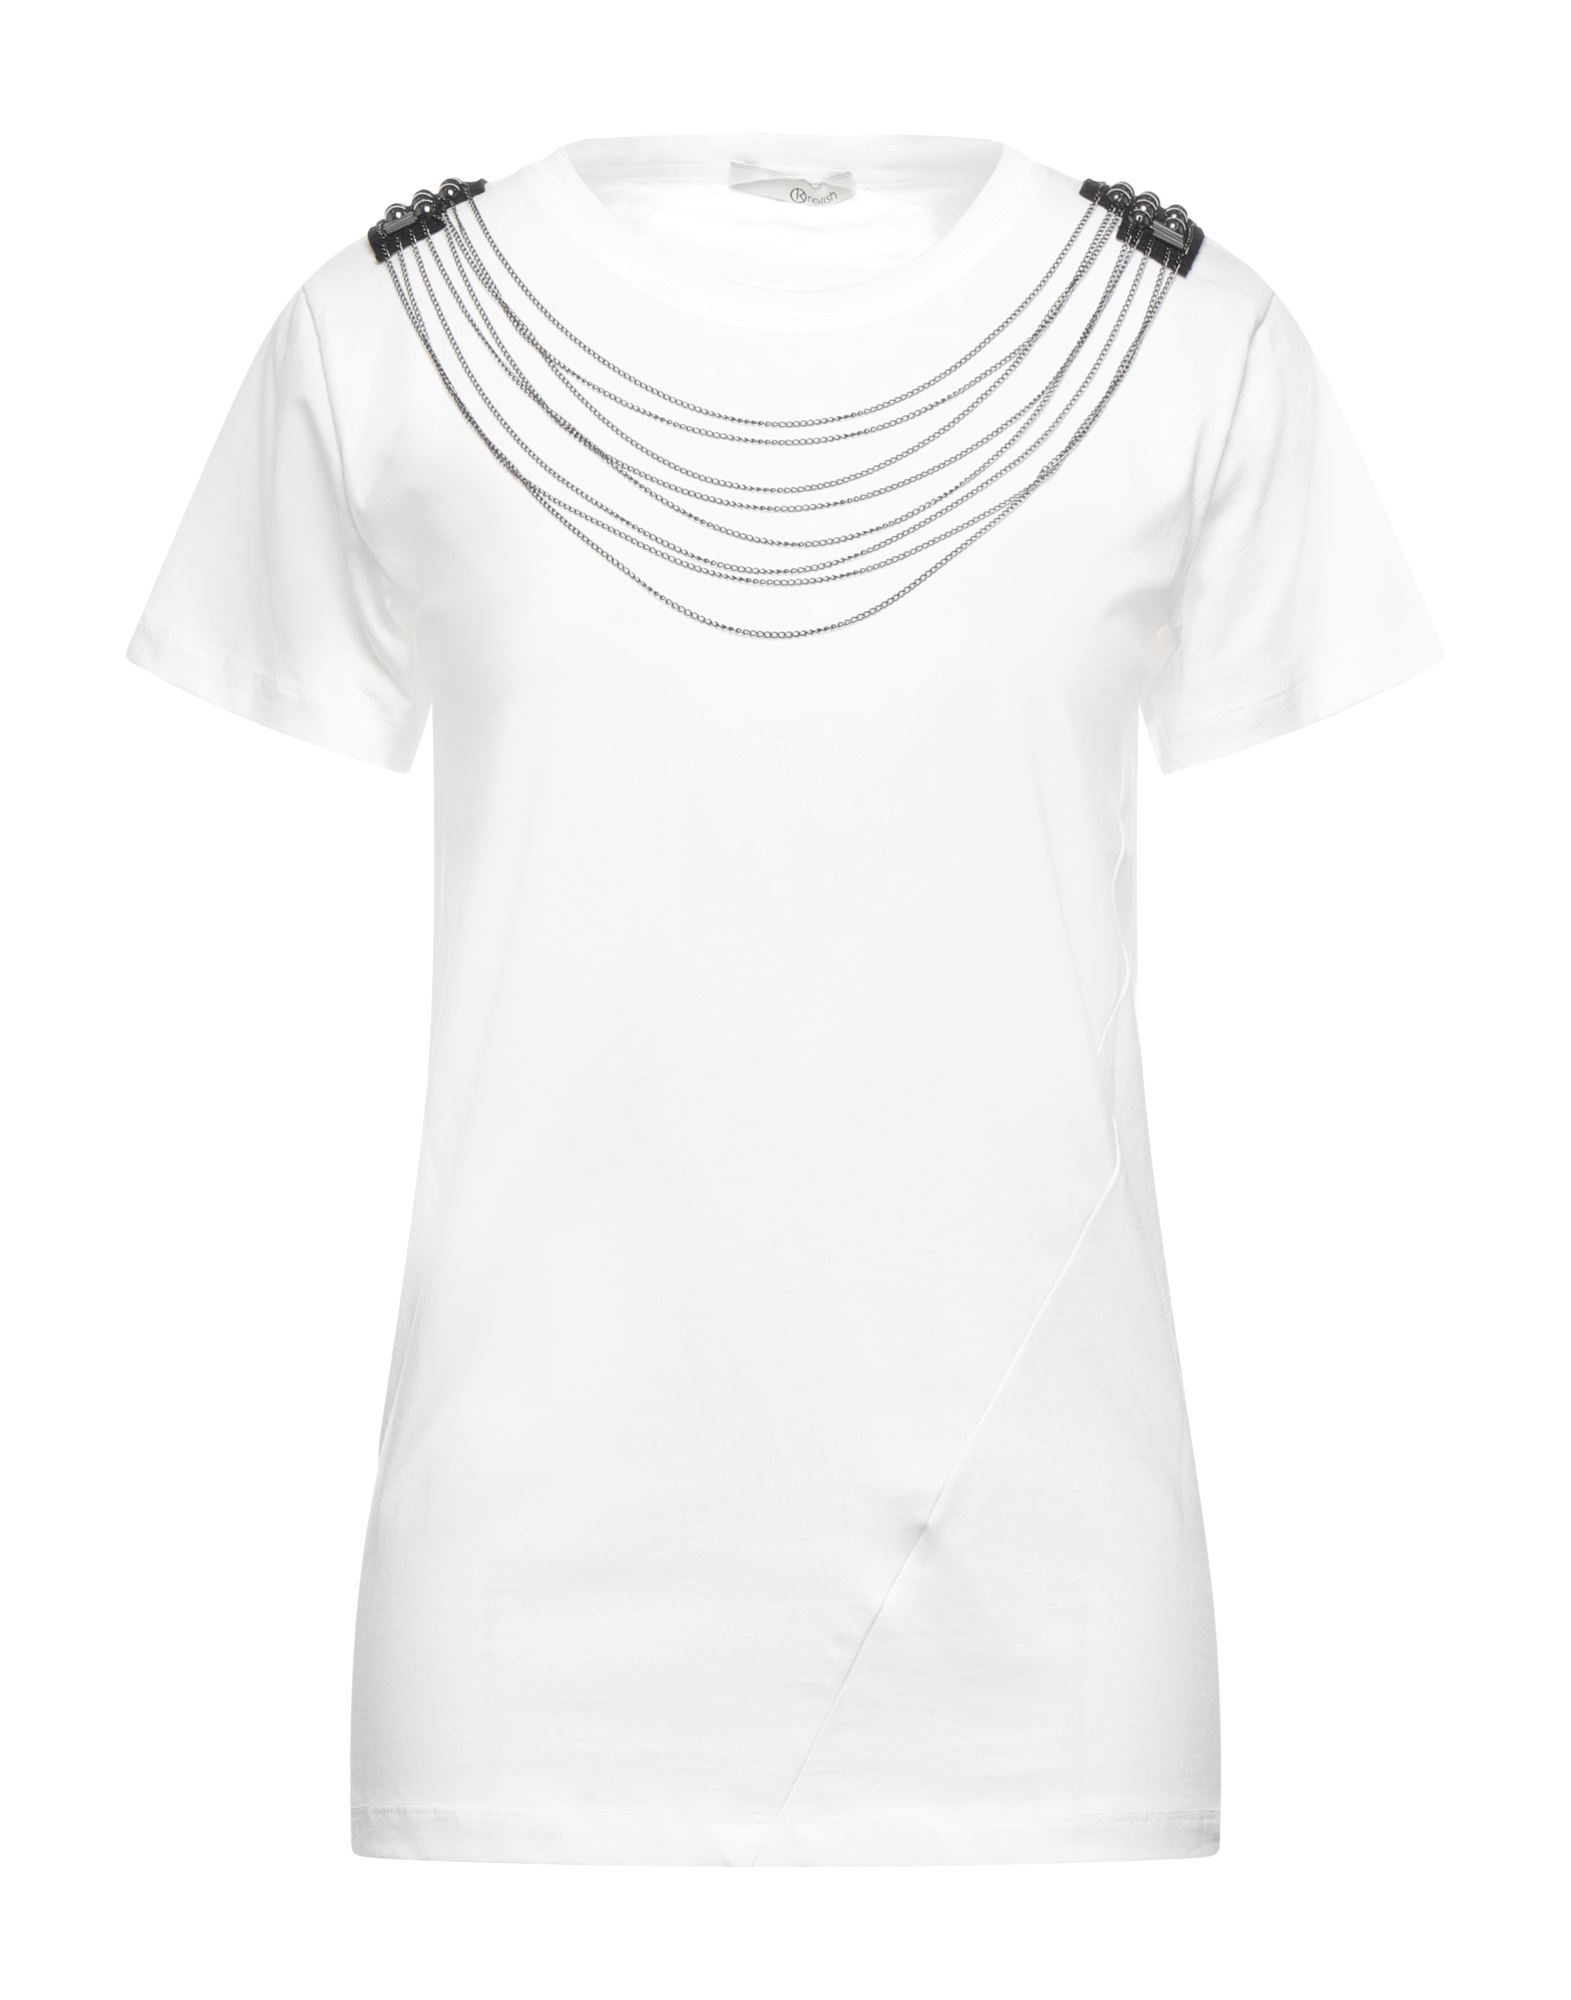 Relish T-shirts In White